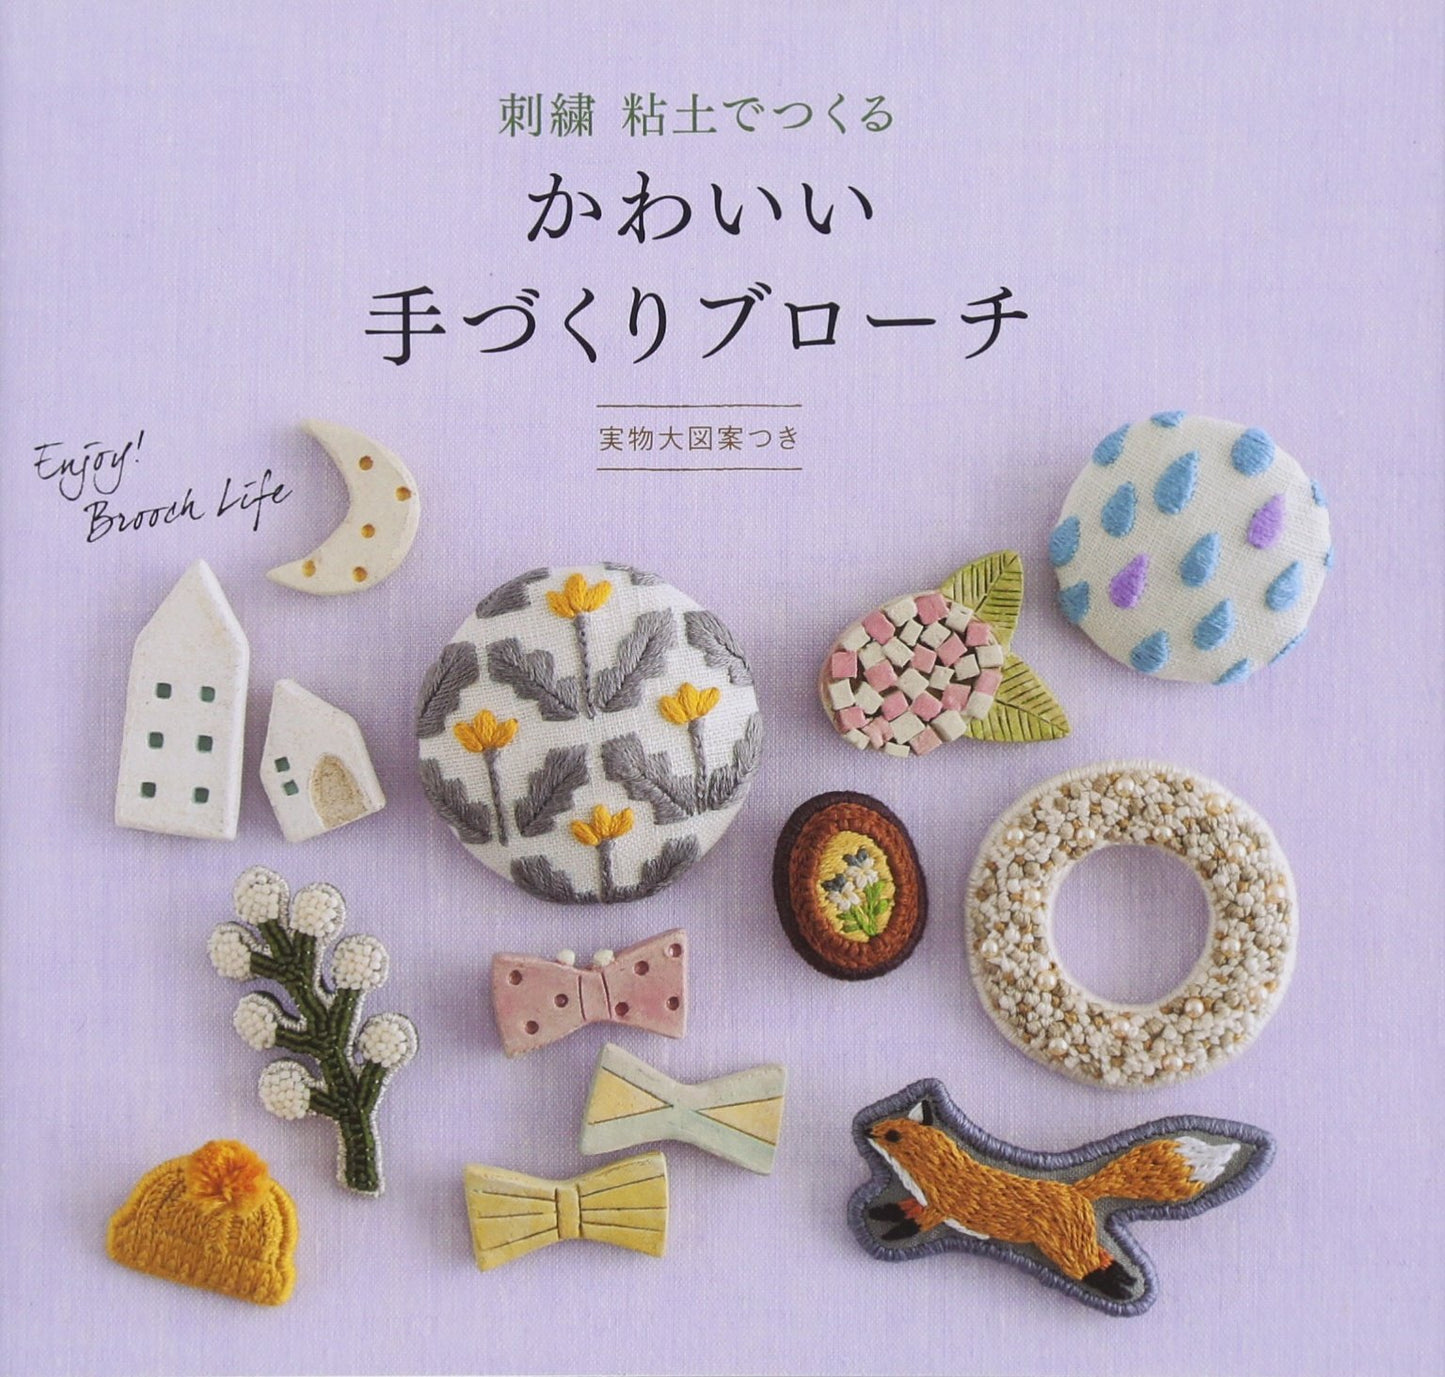 Cute Handmade Brooch with Embroidery and Clay